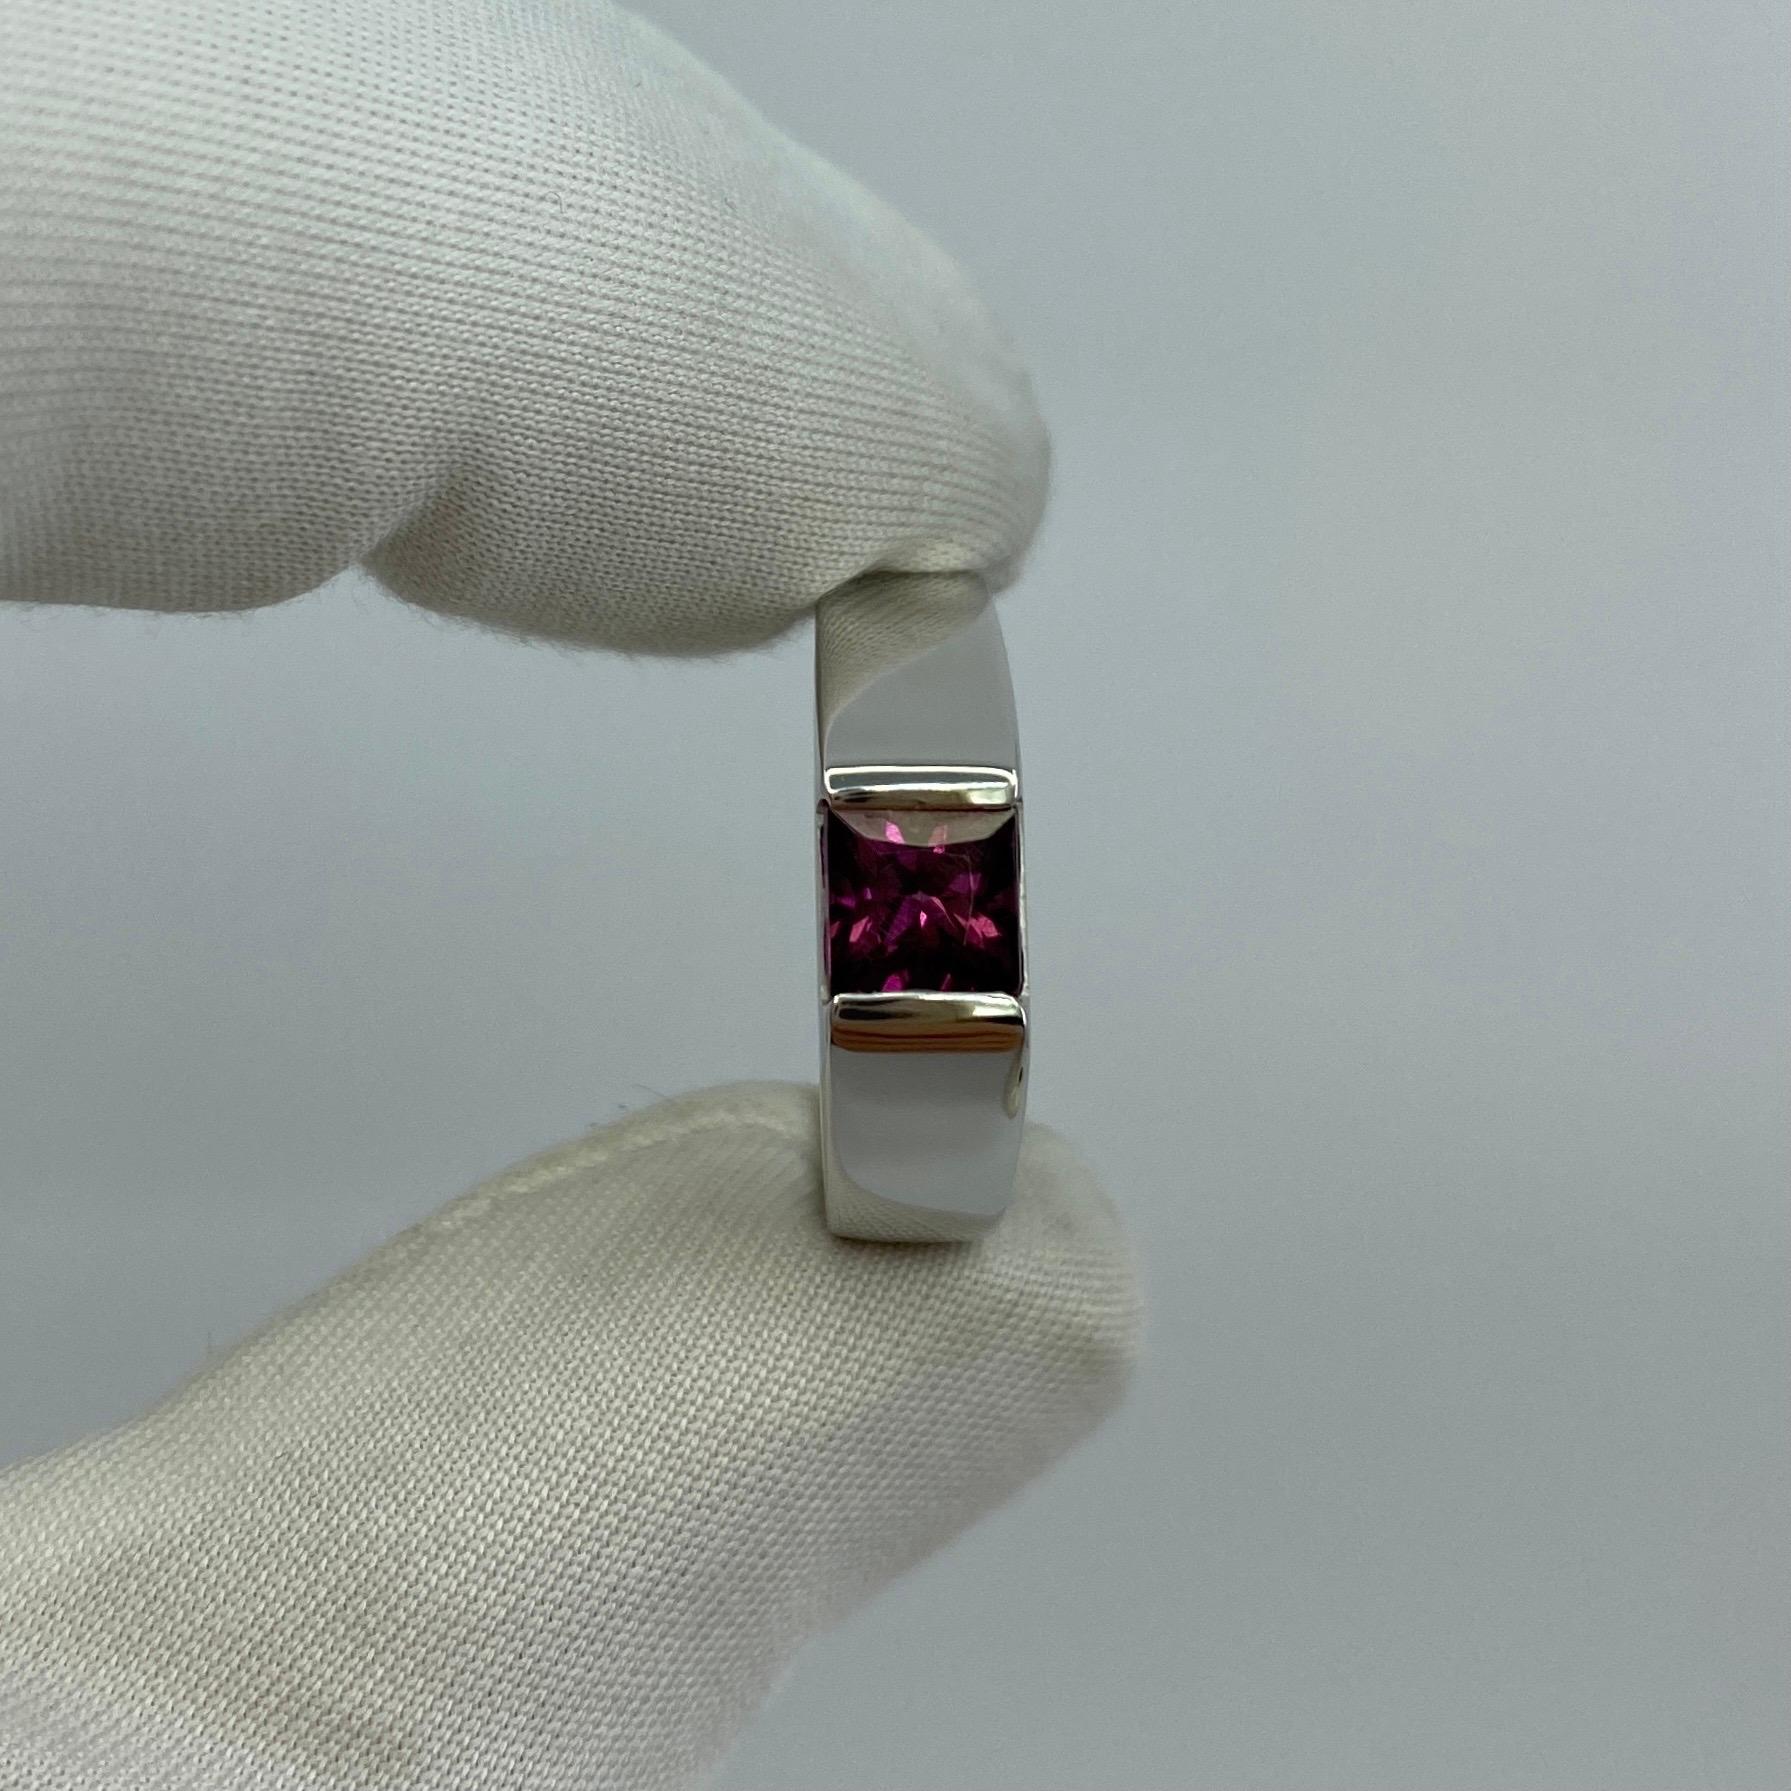 Vintage Cartier Pink Purple Rhodolite Garnet 18 Karat White Gold Tank Ring.

Stunning white gold ring with a 5mm tension set bright pink fancy-cut rhodolite garnet. Fine jewellery houses like Cartier only use the finest of gemstones and this garnet